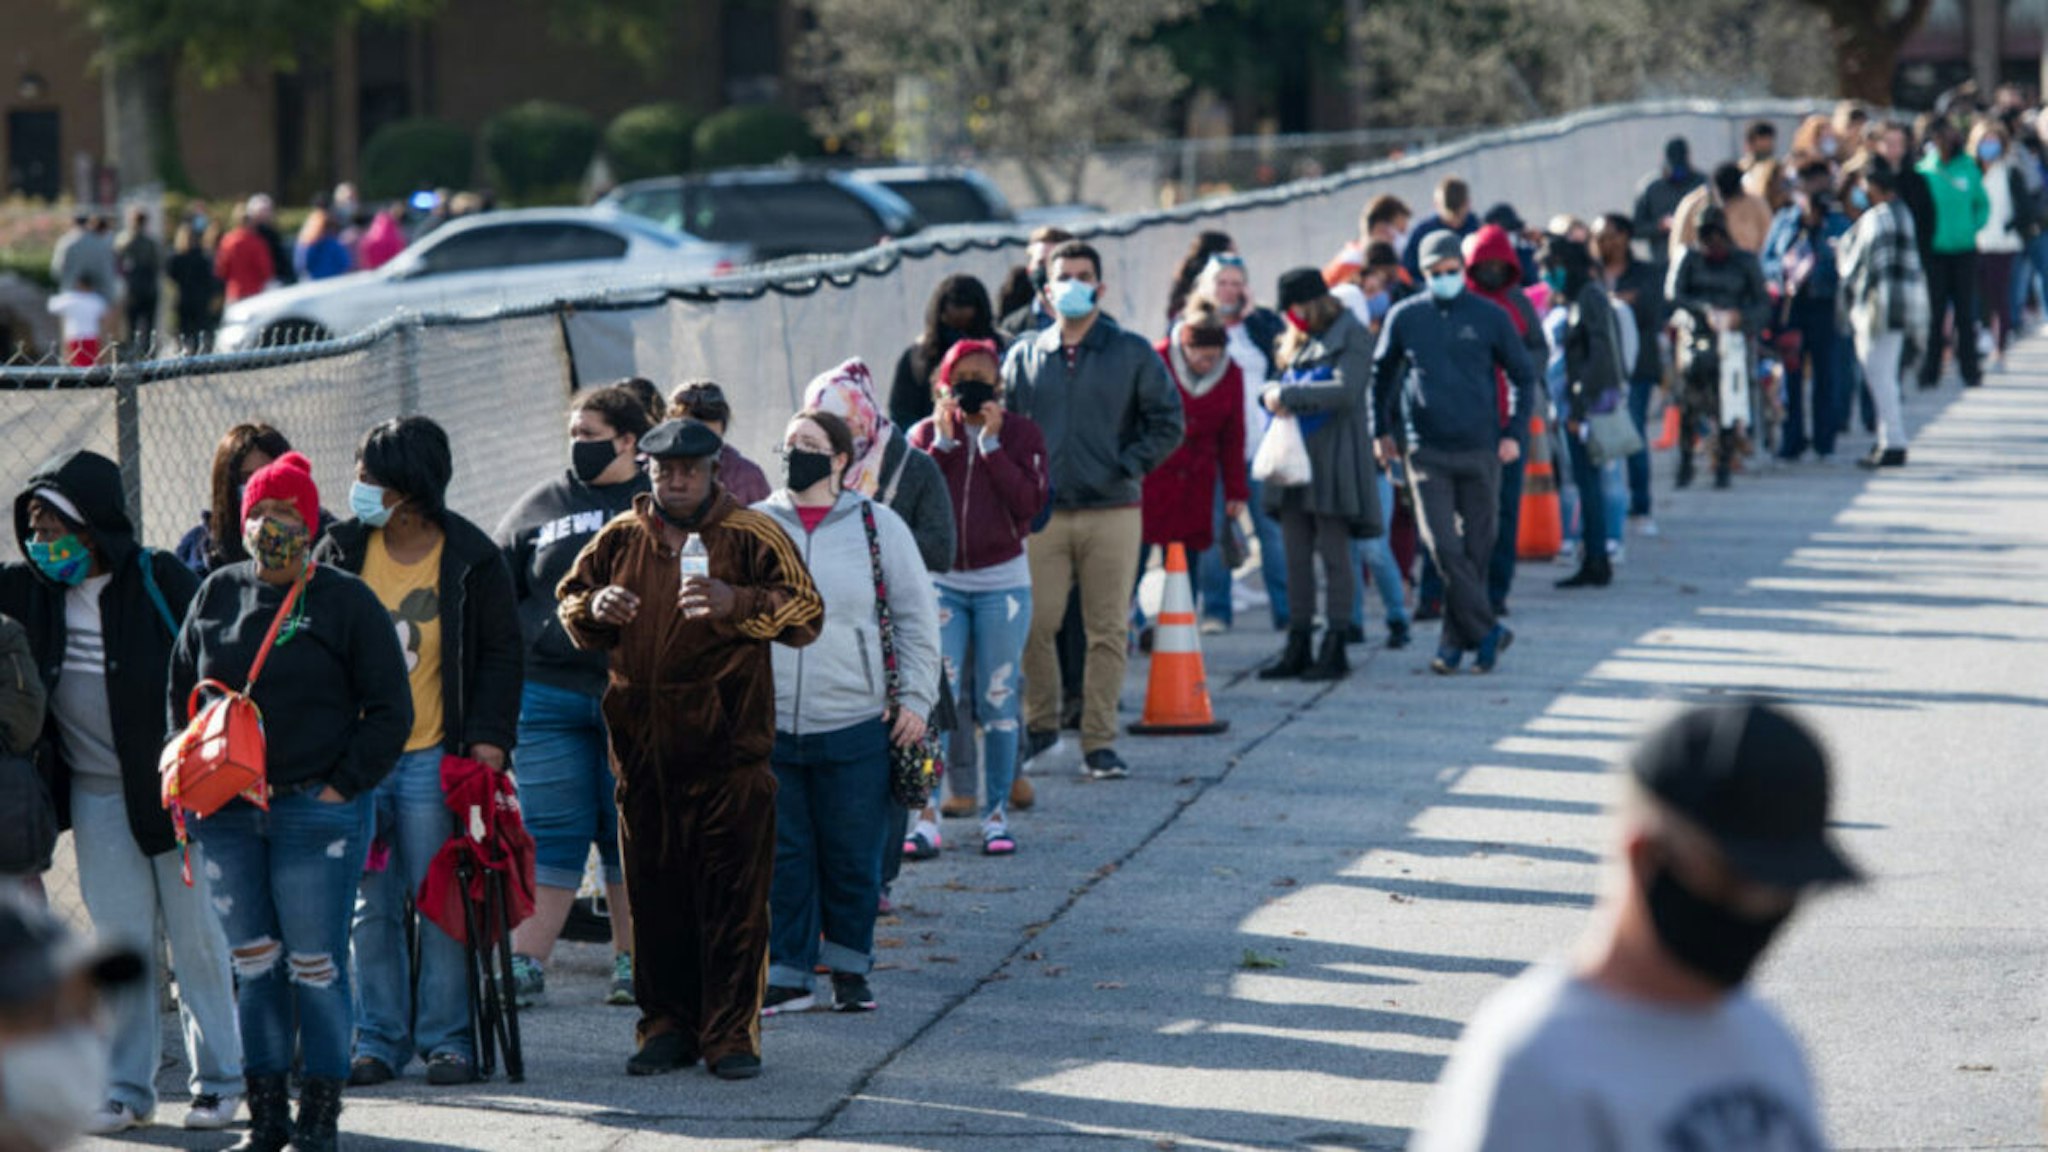 People wait in line to participate in early voting on October 31, 2020 in Greenville, South Carolina. Election Day is November 3.